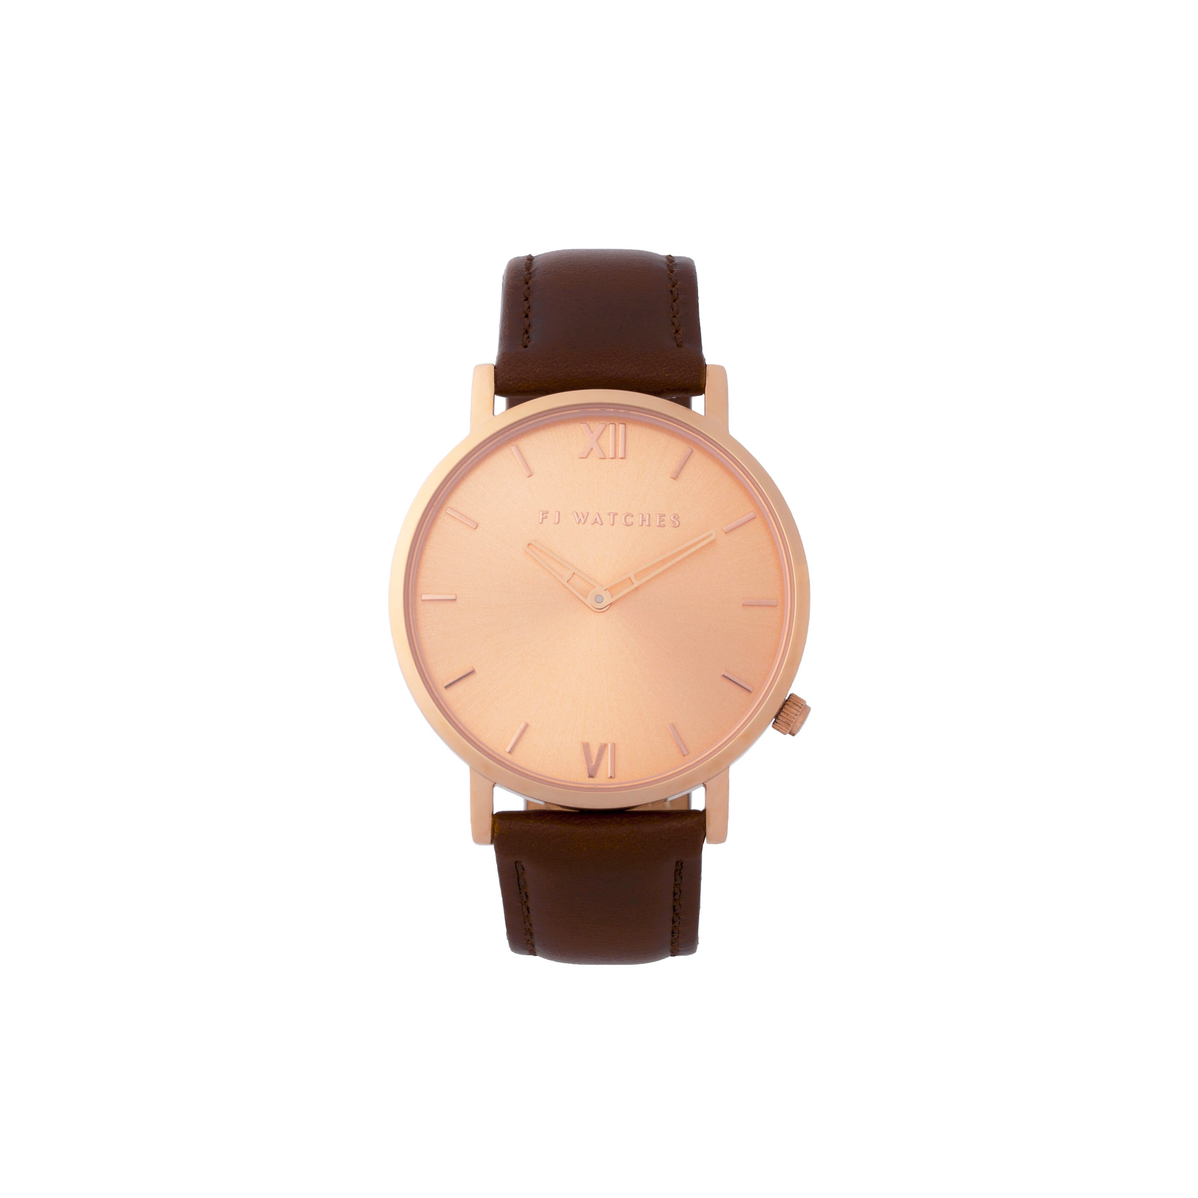 FJ Watches sunset rose gold rosegold watch women 36mm brown leather minimalist